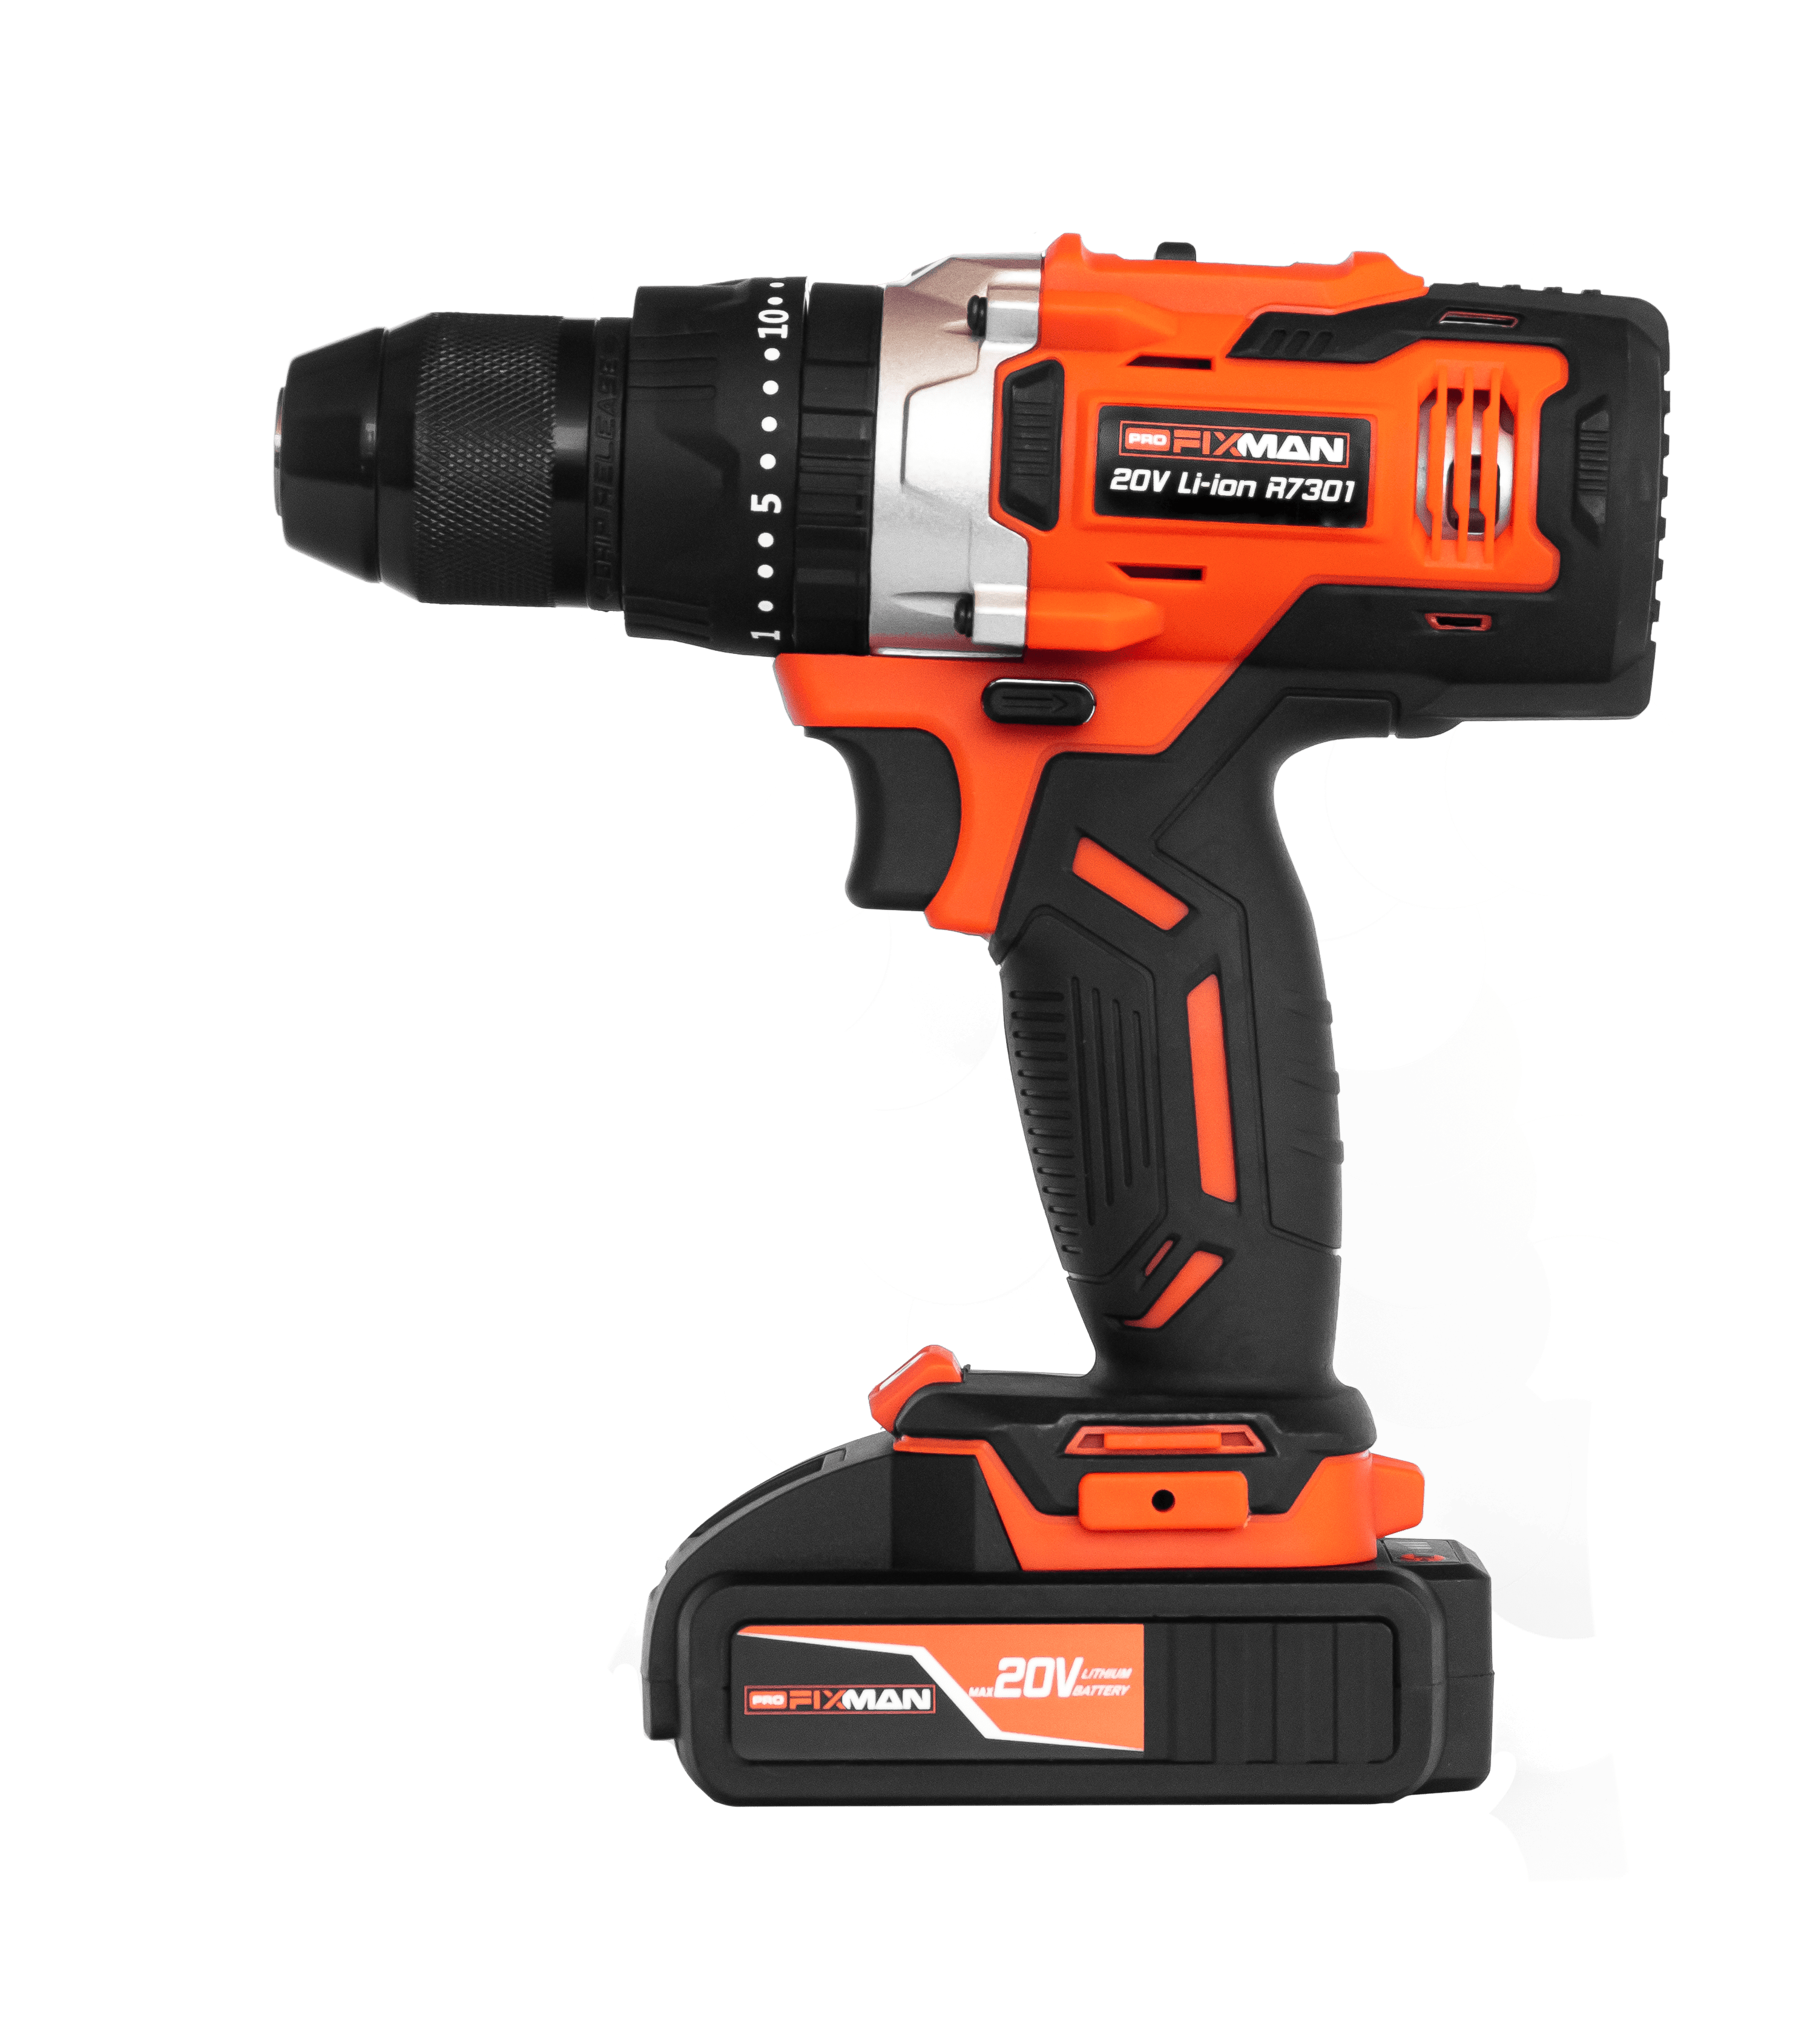 How to Use a Cordless Power Drill